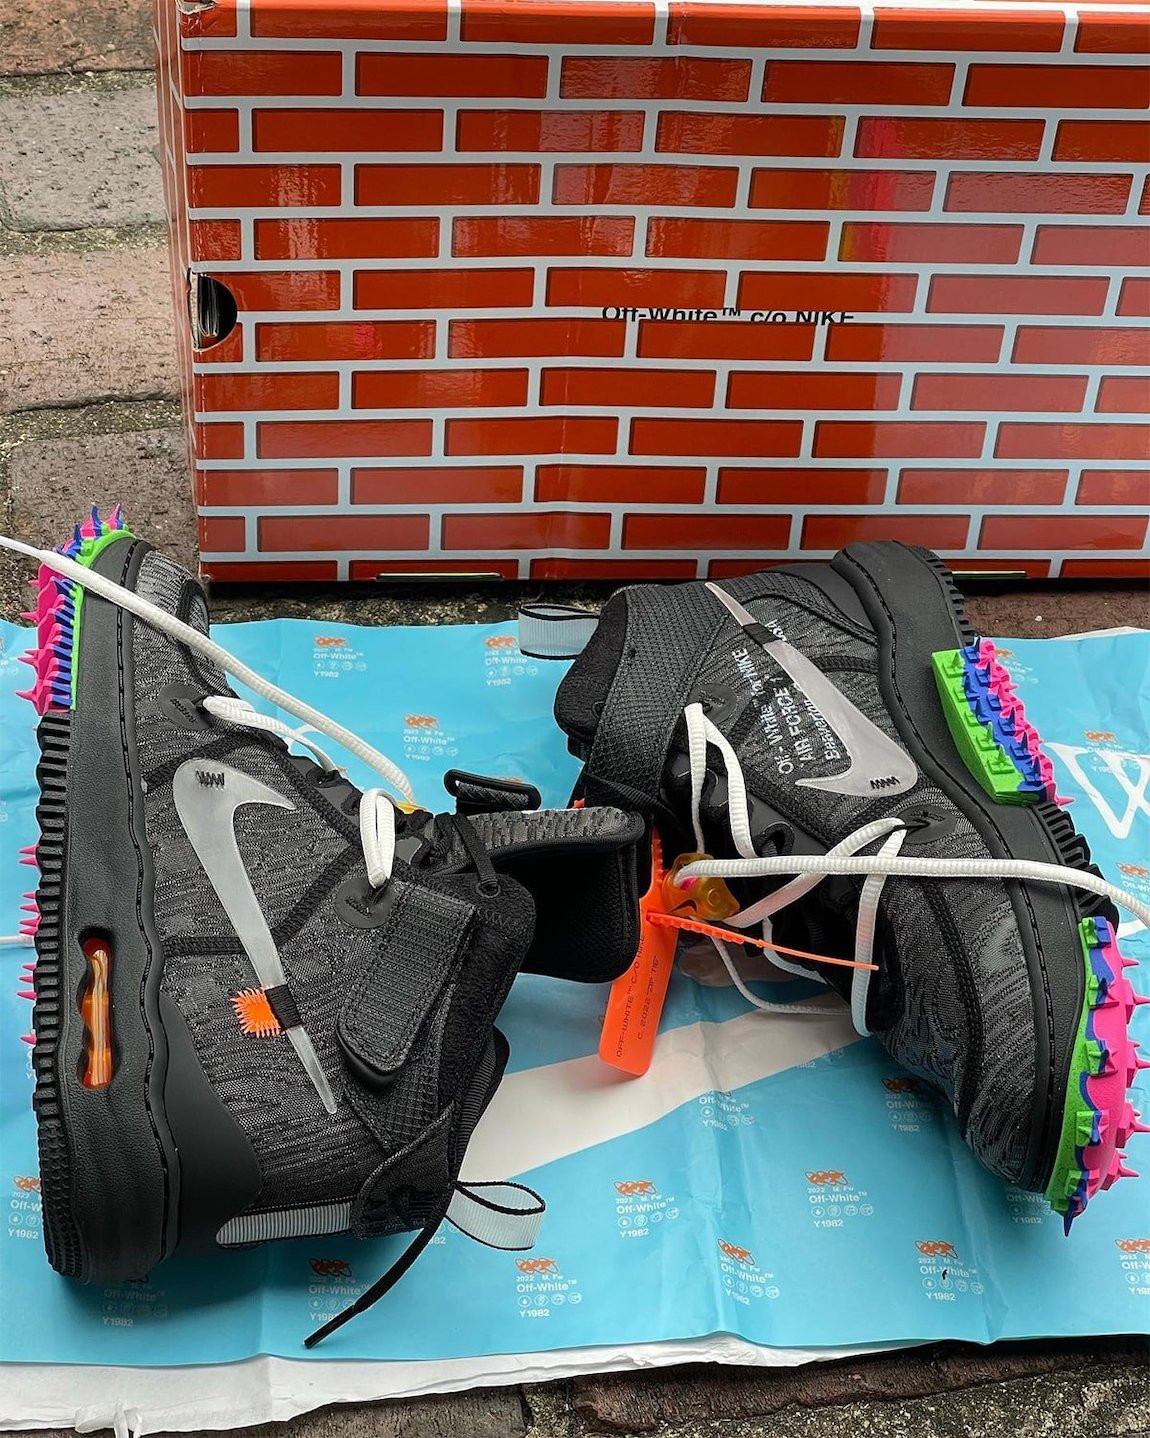 Off-White™ x Nike Air Force 1 Mid Release Date